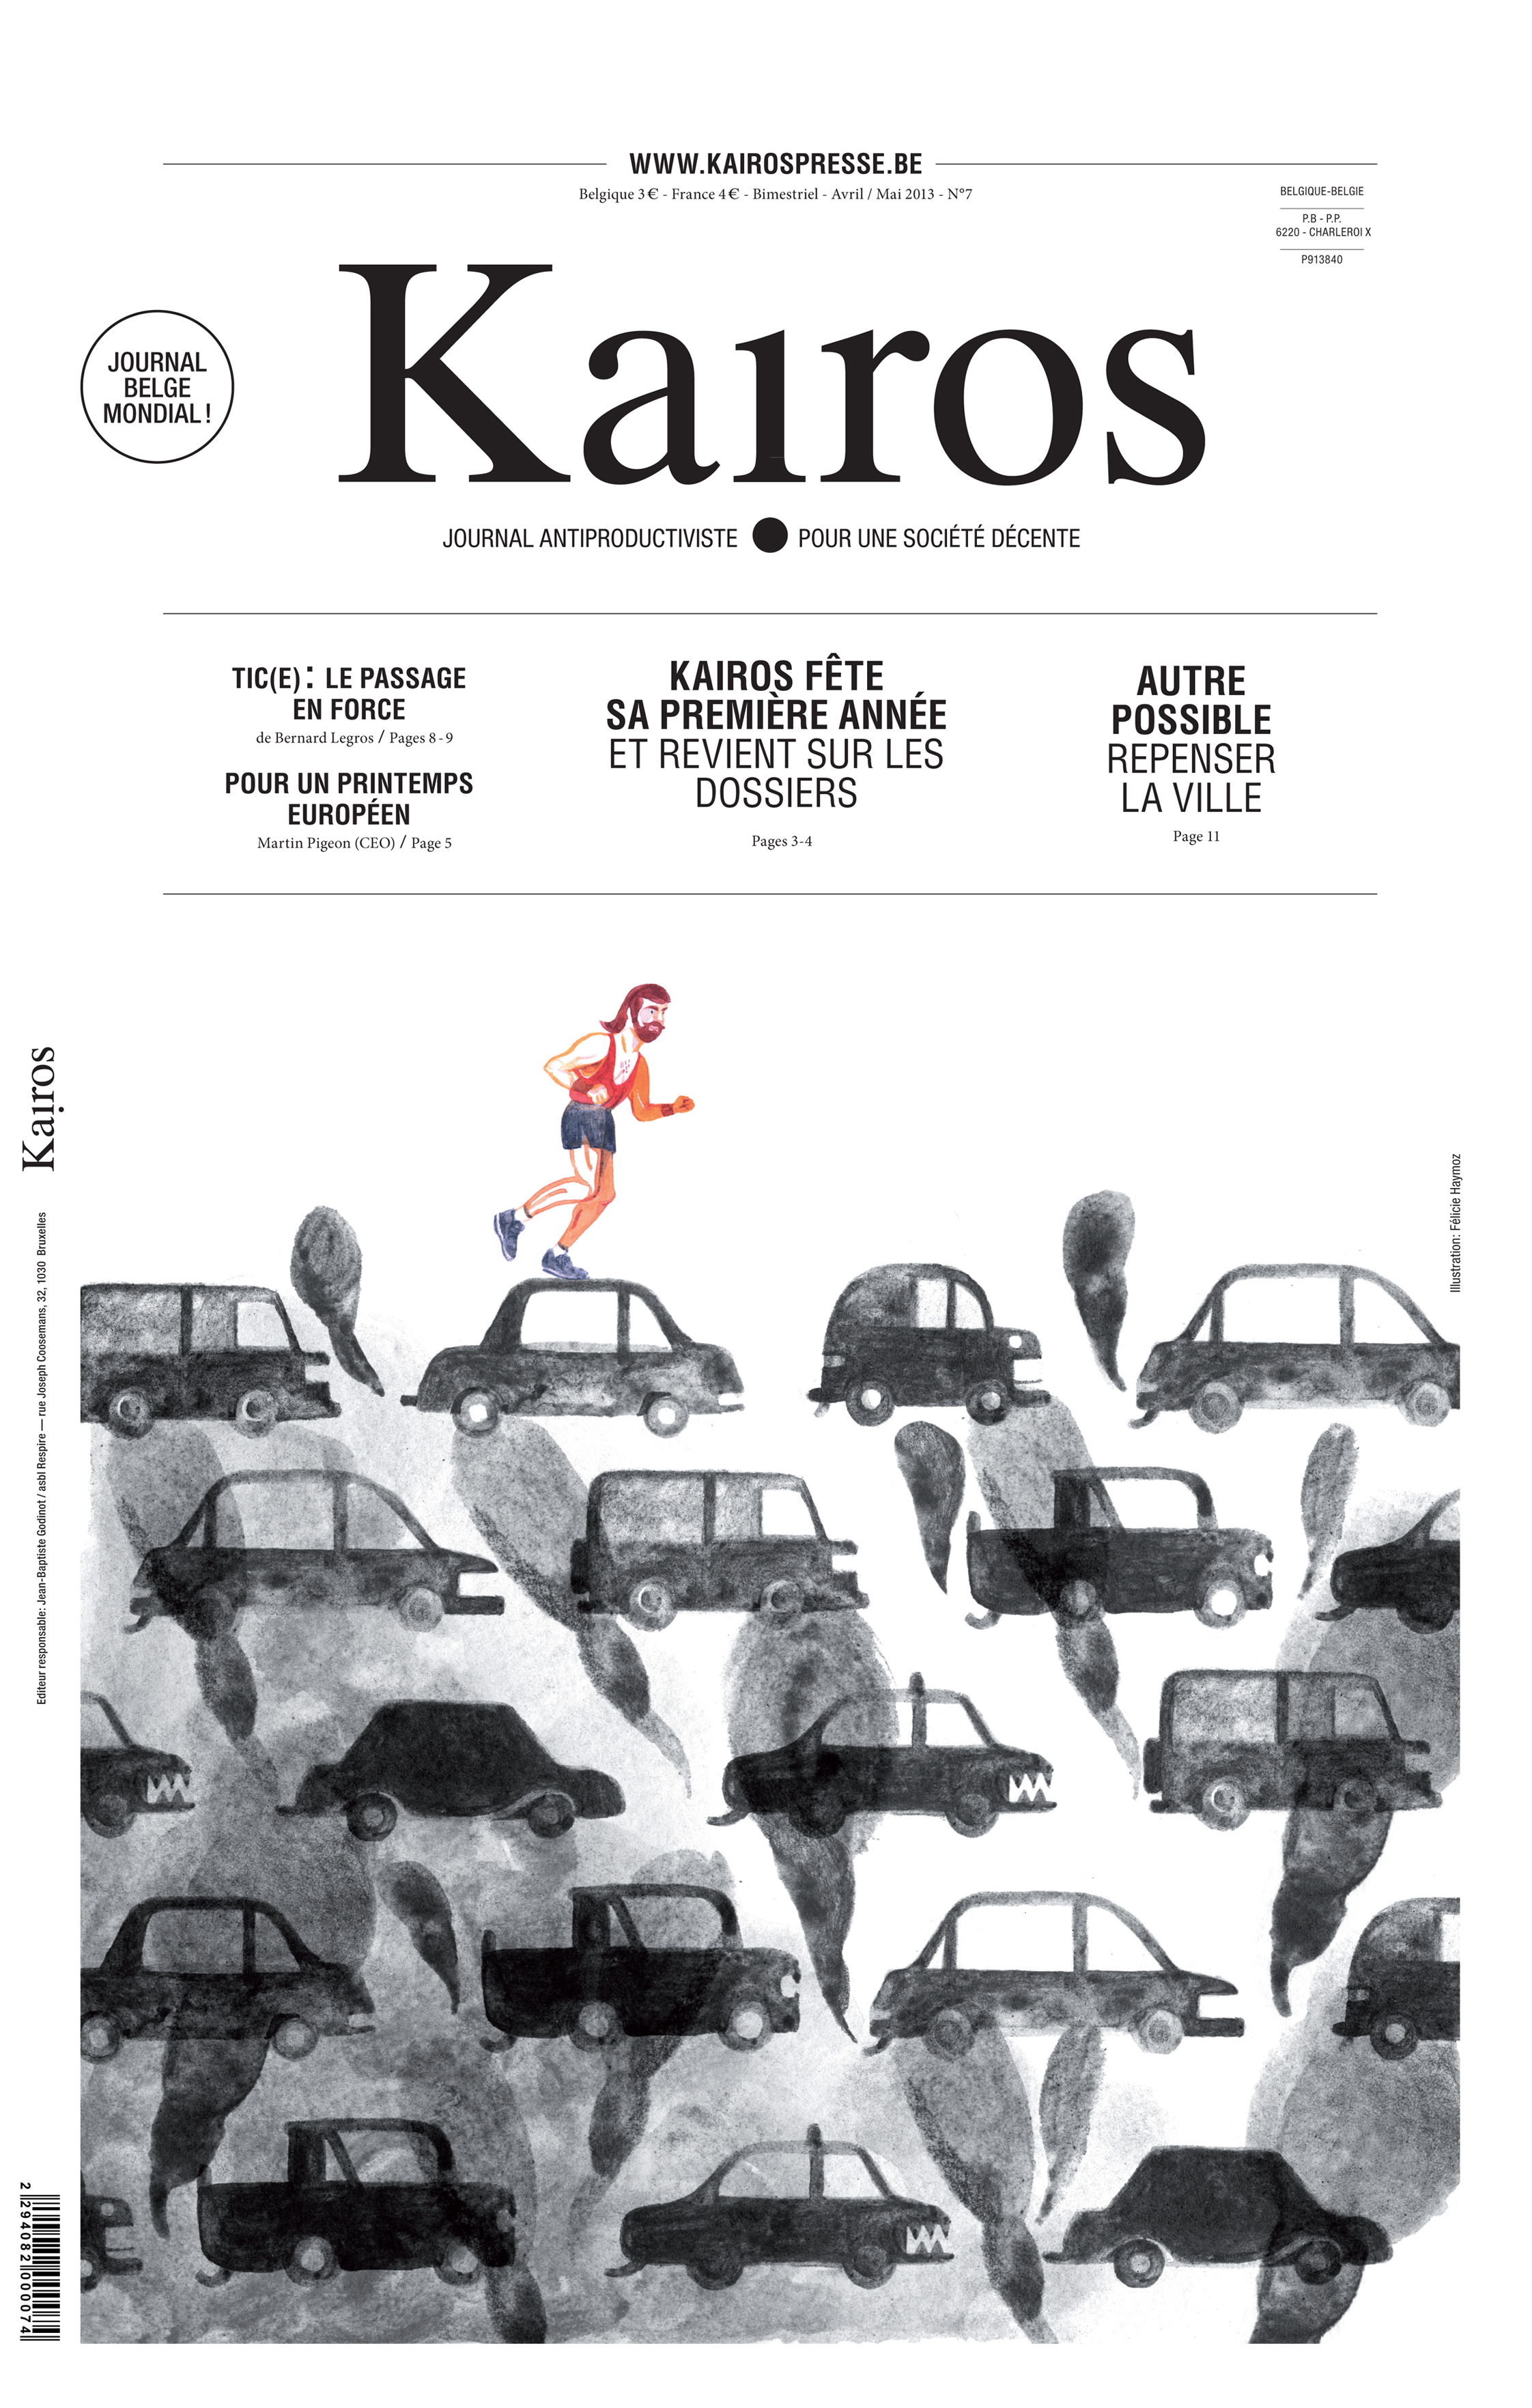  Cover for the Kairos Magazine issue 7 on the theme Rethinking the City 